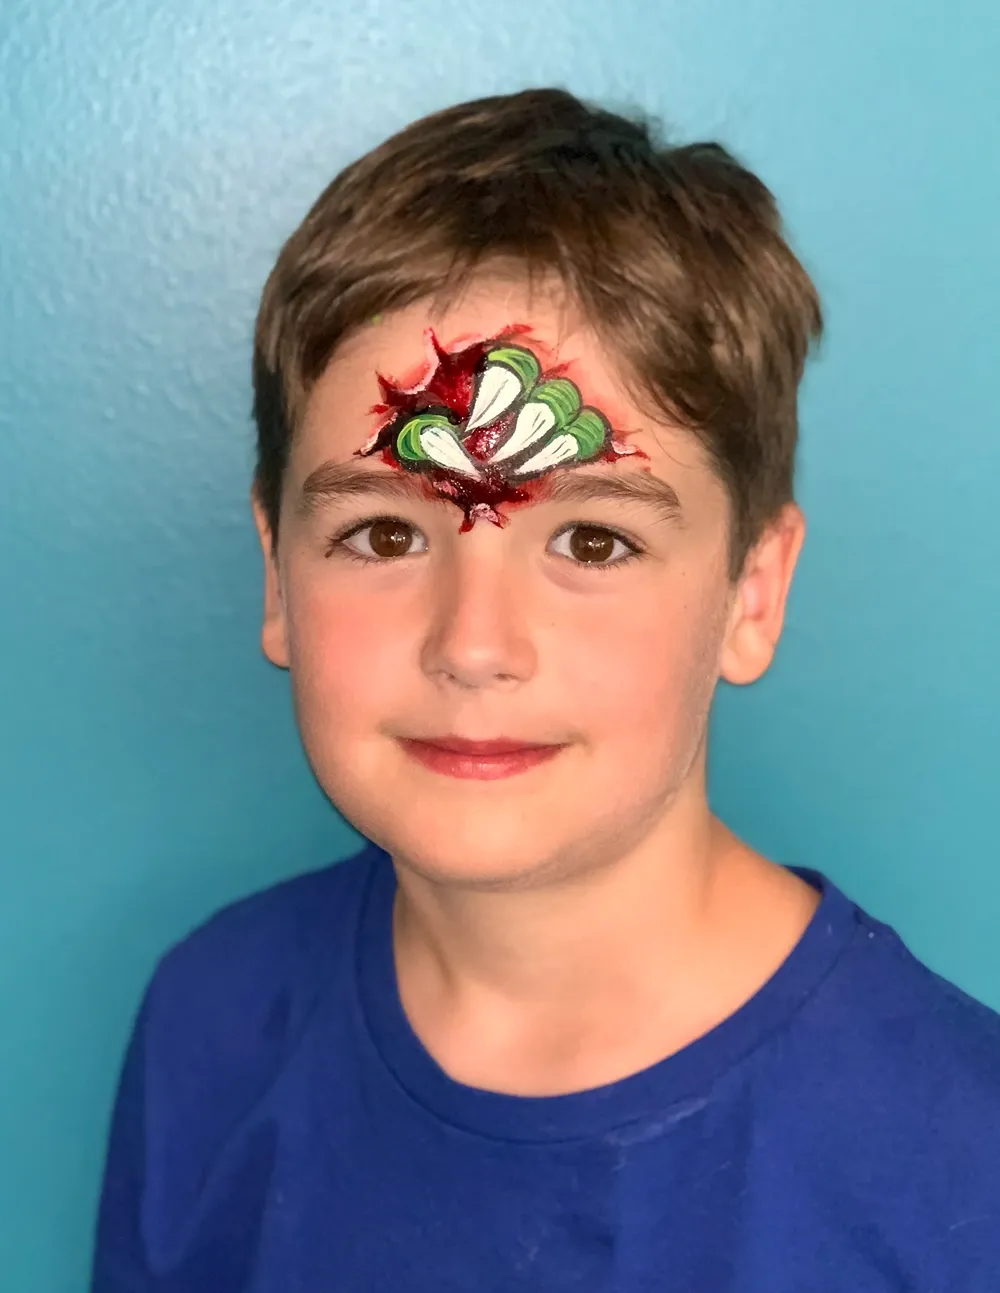 boy with monster claw face paint